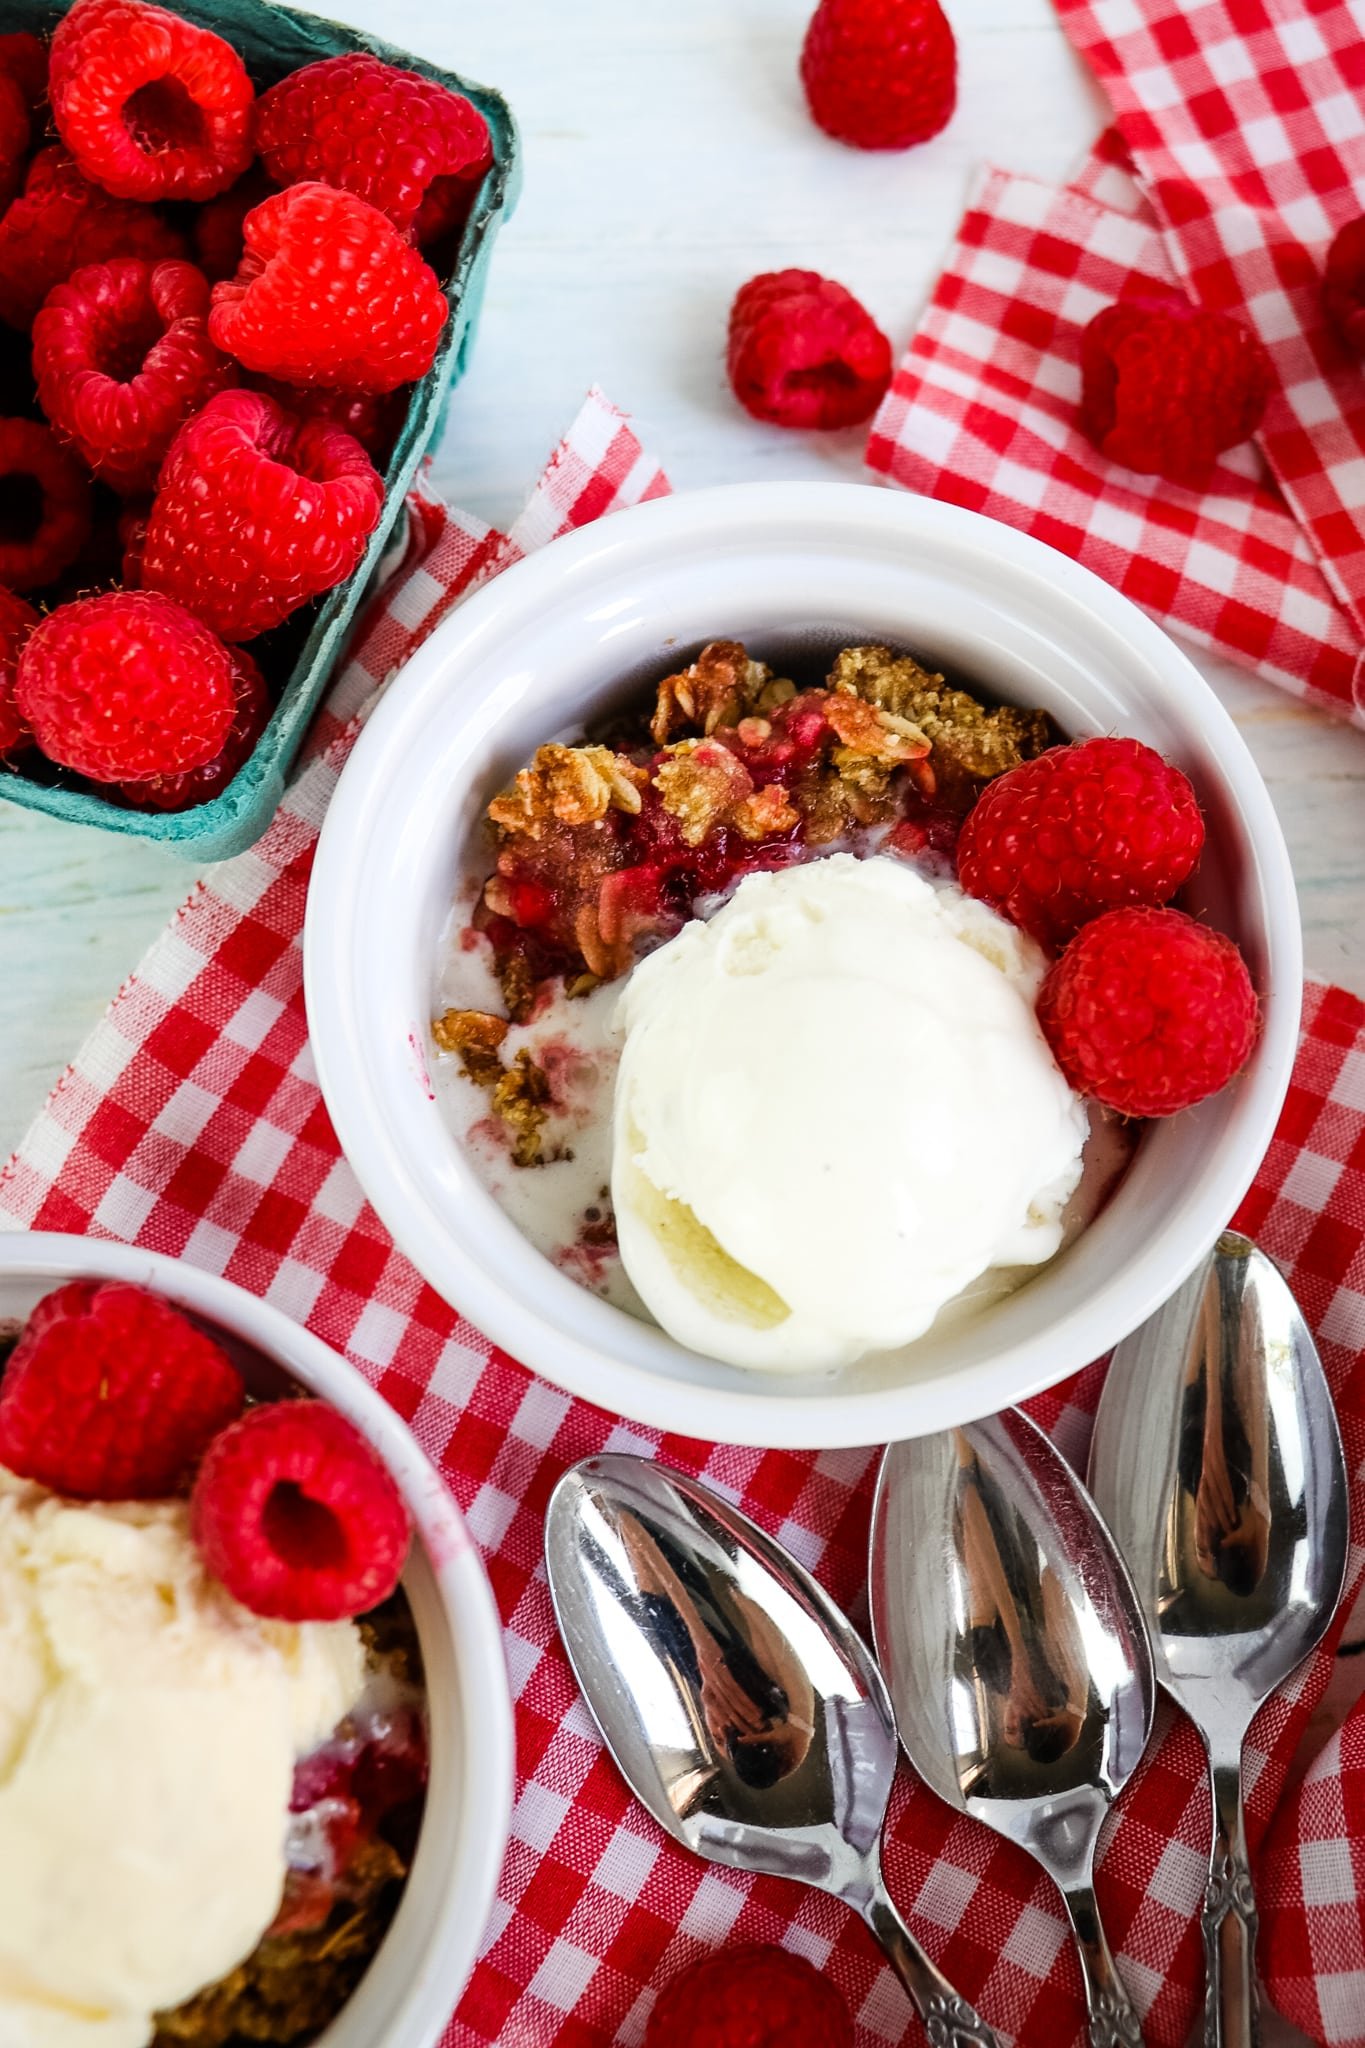 Single dish of raspberry crumble topped with ice cream and fresh raspberries.